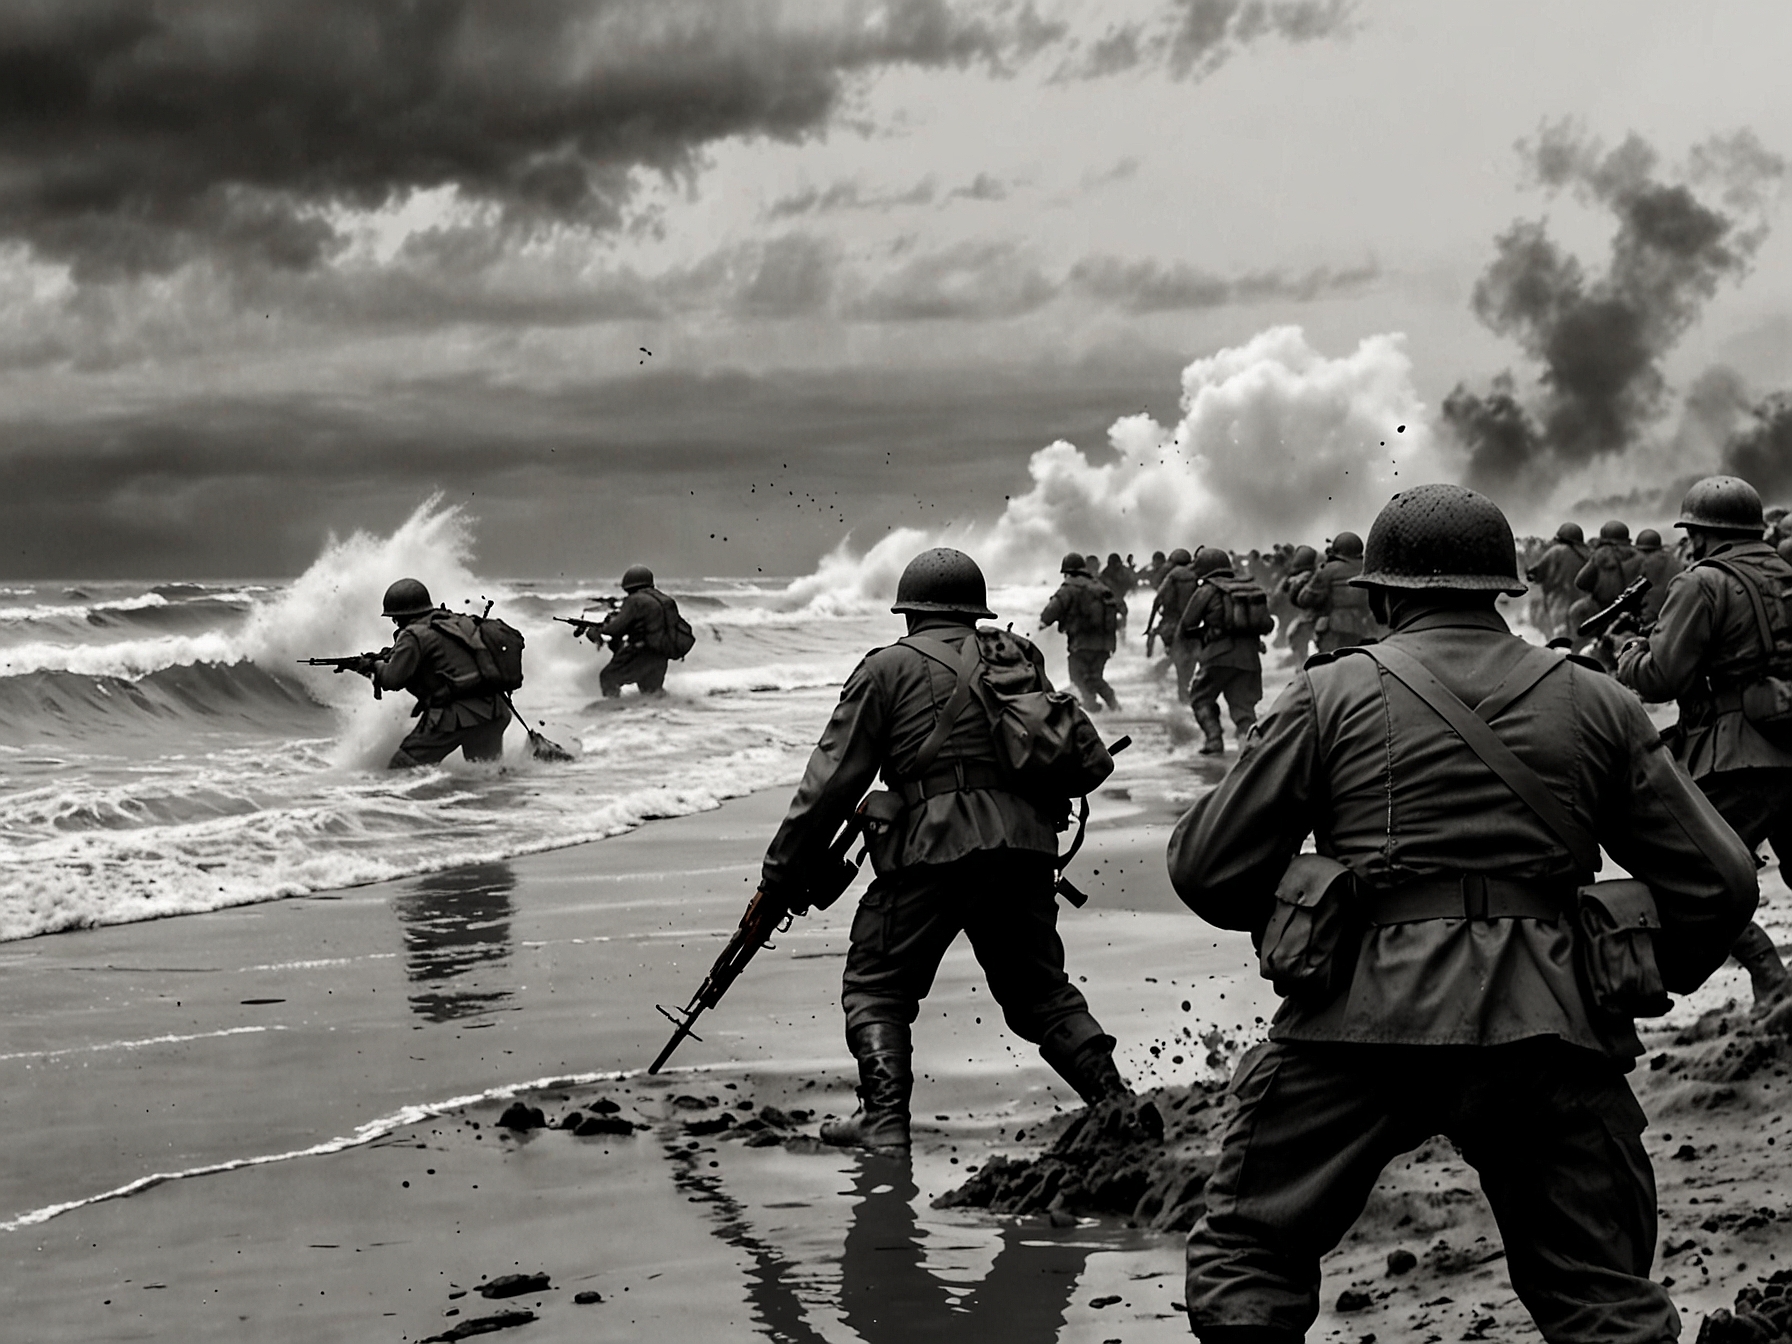 A powerful historical image of soldiers storming the beaches of Normandy on D-Day, symbolizing the relentless determination and courage exhibited by the Allied forces during World War II.